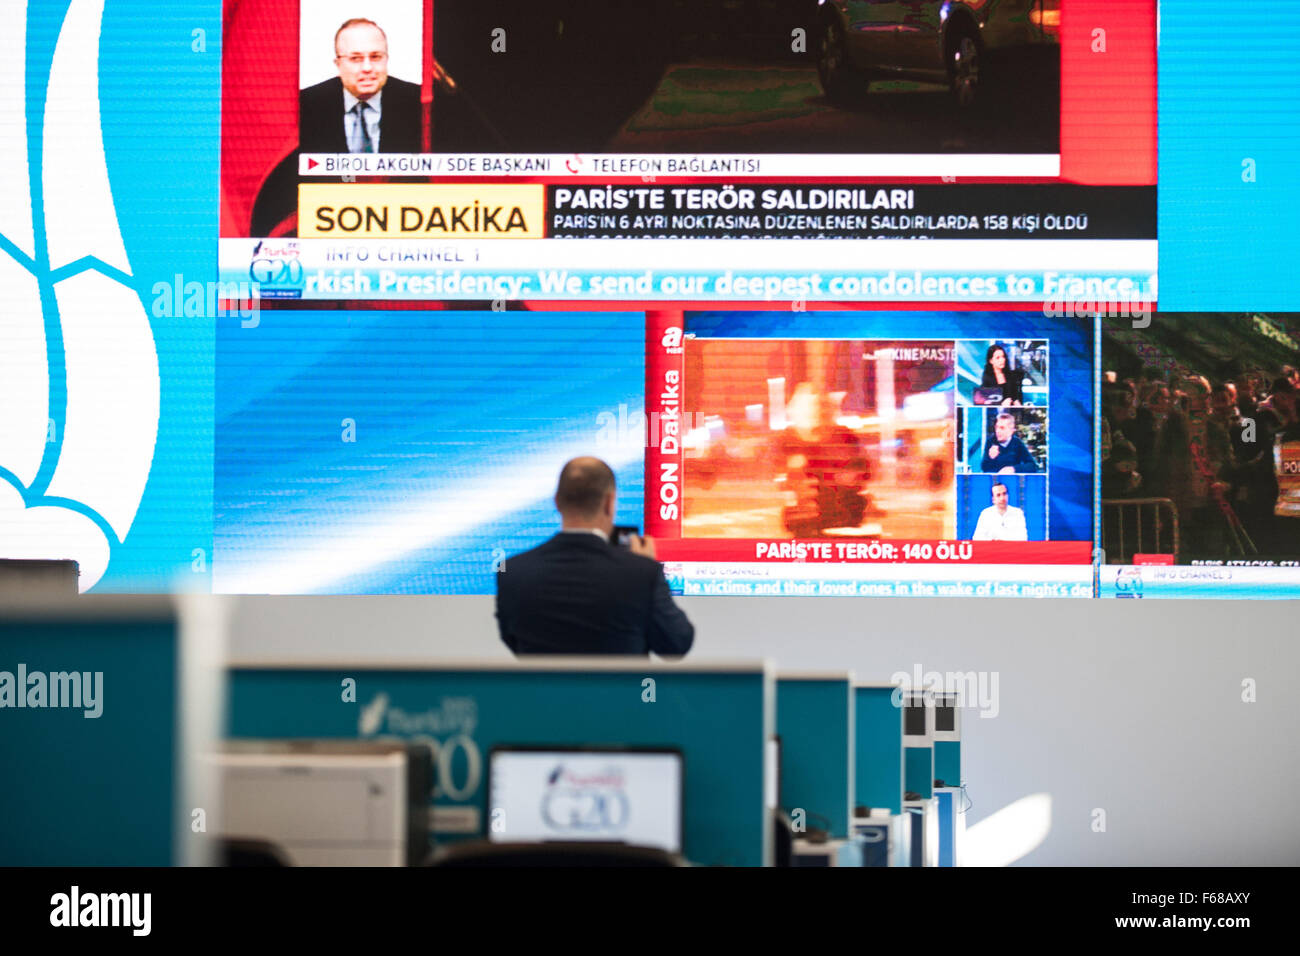 Antalya, Mediterranean resort city of Turkey. 13th Nov, 2015. A staff films the news broadcasting Paris attacks on screen at the press center of G20 summit, in Antalya, a Mediterranean resort city of Turkey, on Nov. 13, 2015. French President Francois Hollande canceled his trip to Turkey for the upcoming G20 summit because of the multiple attacks in Paris on Friday. © Pan Chaoyue/Xinhua/Alamy Live News Stock Photo